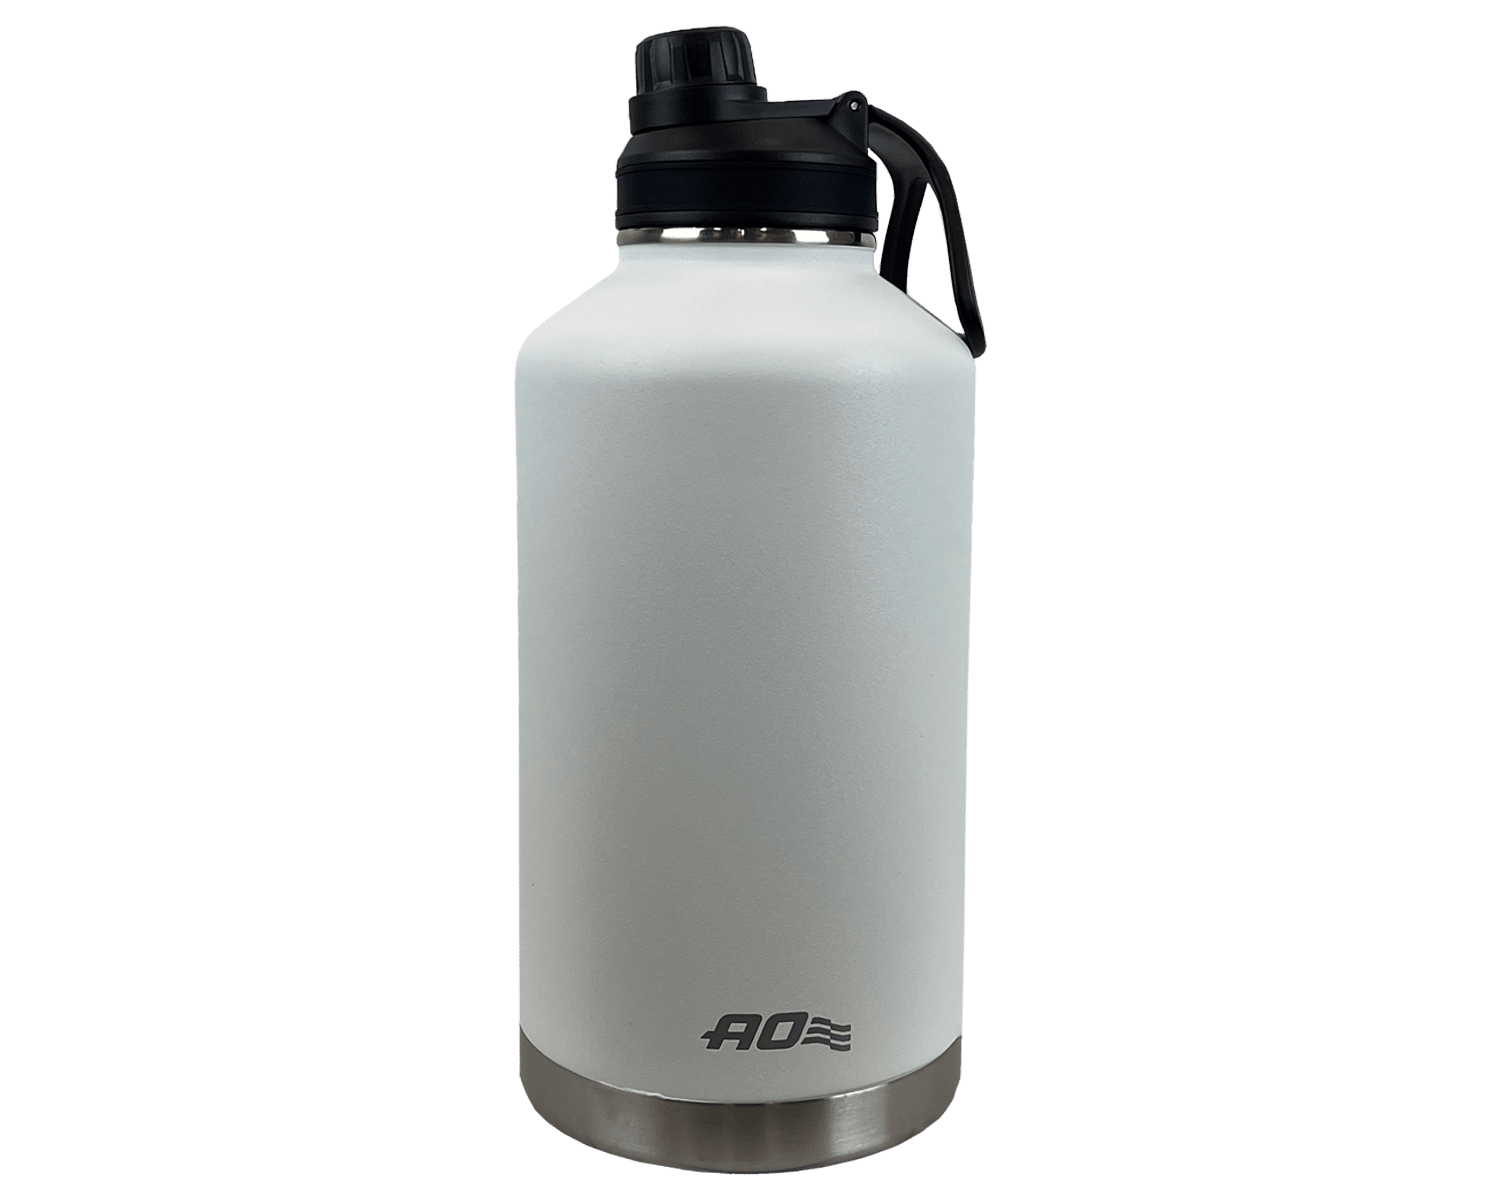 64oz Insulated Growler - AO Coolers